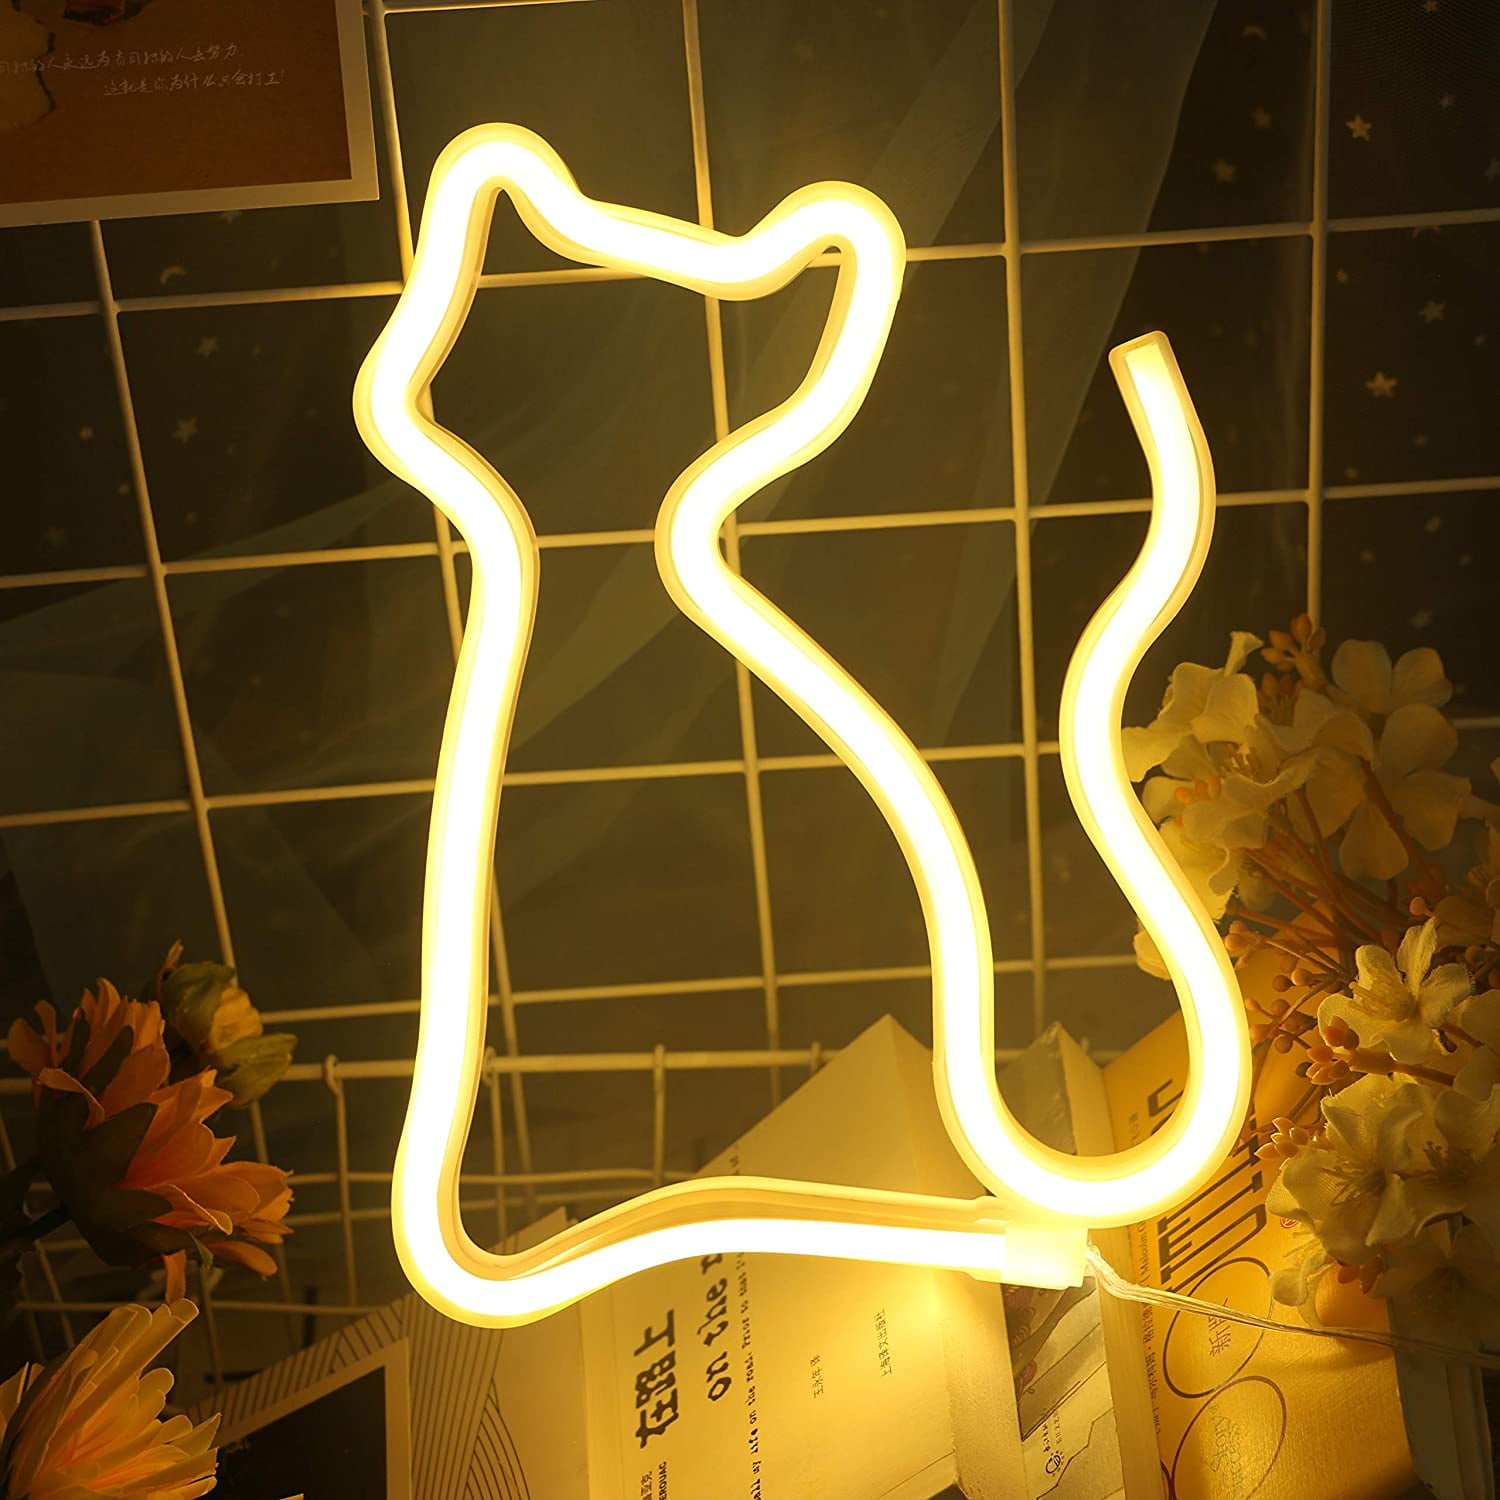 Cat Led Signs Neon Lights For Wall Decor Usb Or Battery Operated Sign Bedroom Decoration Table Decorative Bar Home Party Kids Girls Room Canada - Neon Light Up Wall Decor